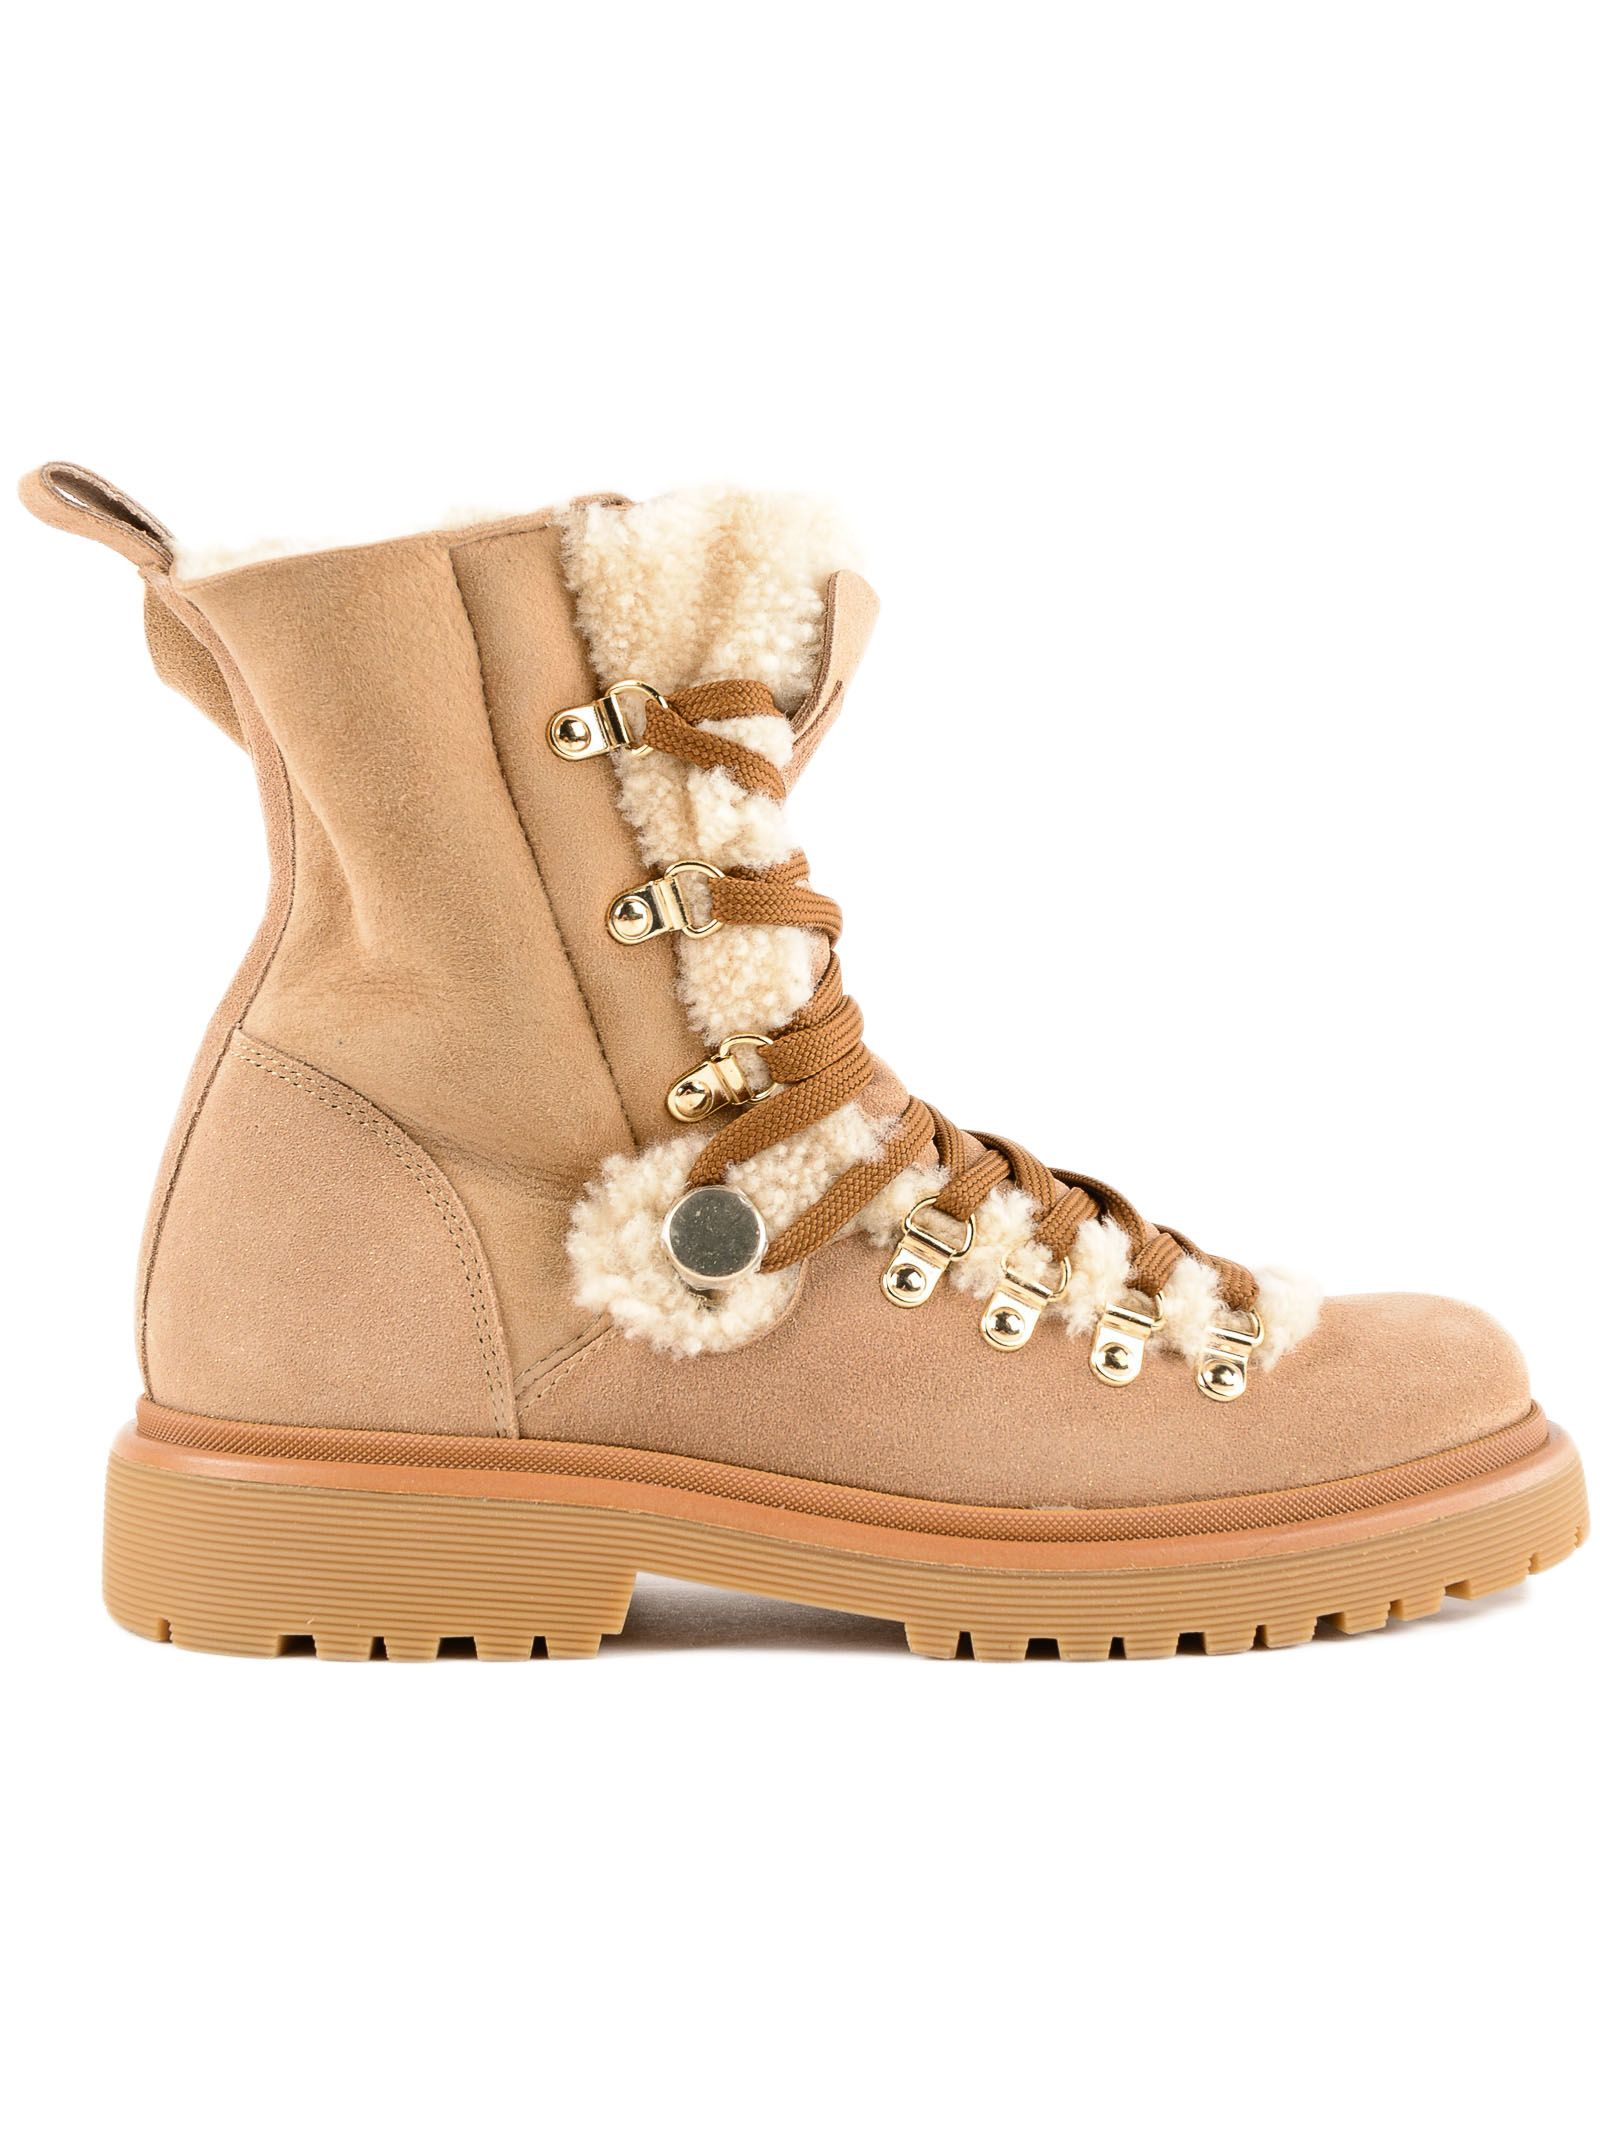 Moncler Glitter Shearling Lined Hiking Boots - Beige - 10667689 | italist